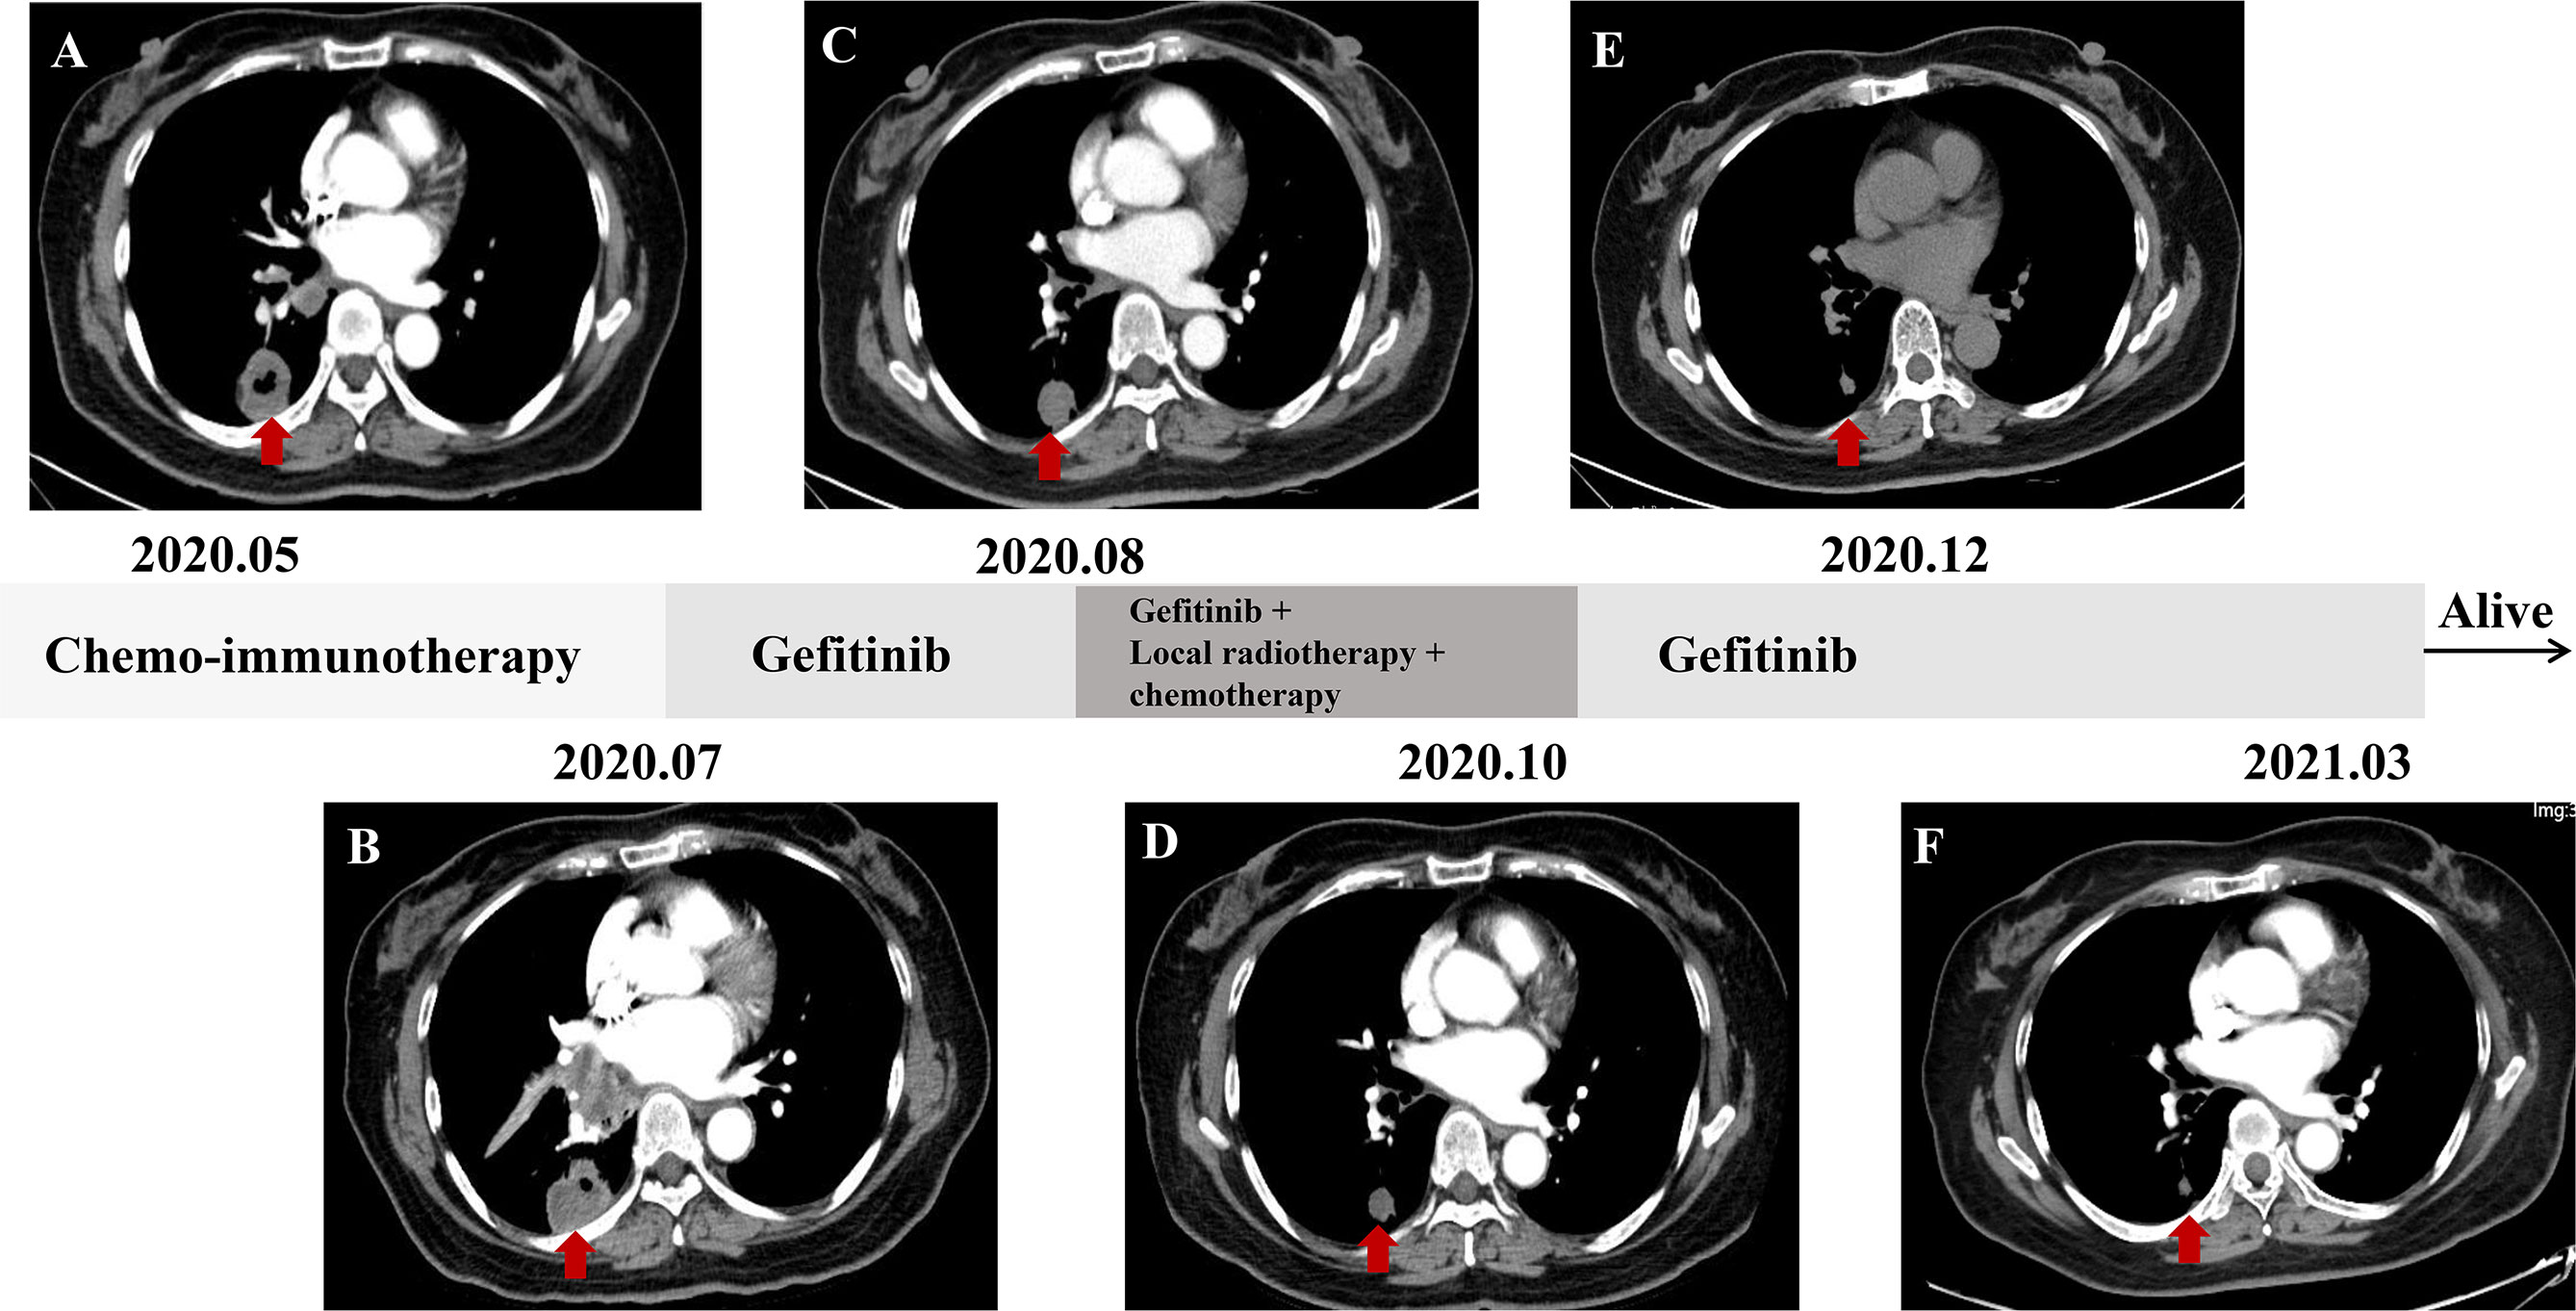 Frontiers | Case Report: An “Immune-Cold” EGFR Mutant NSCLC With 